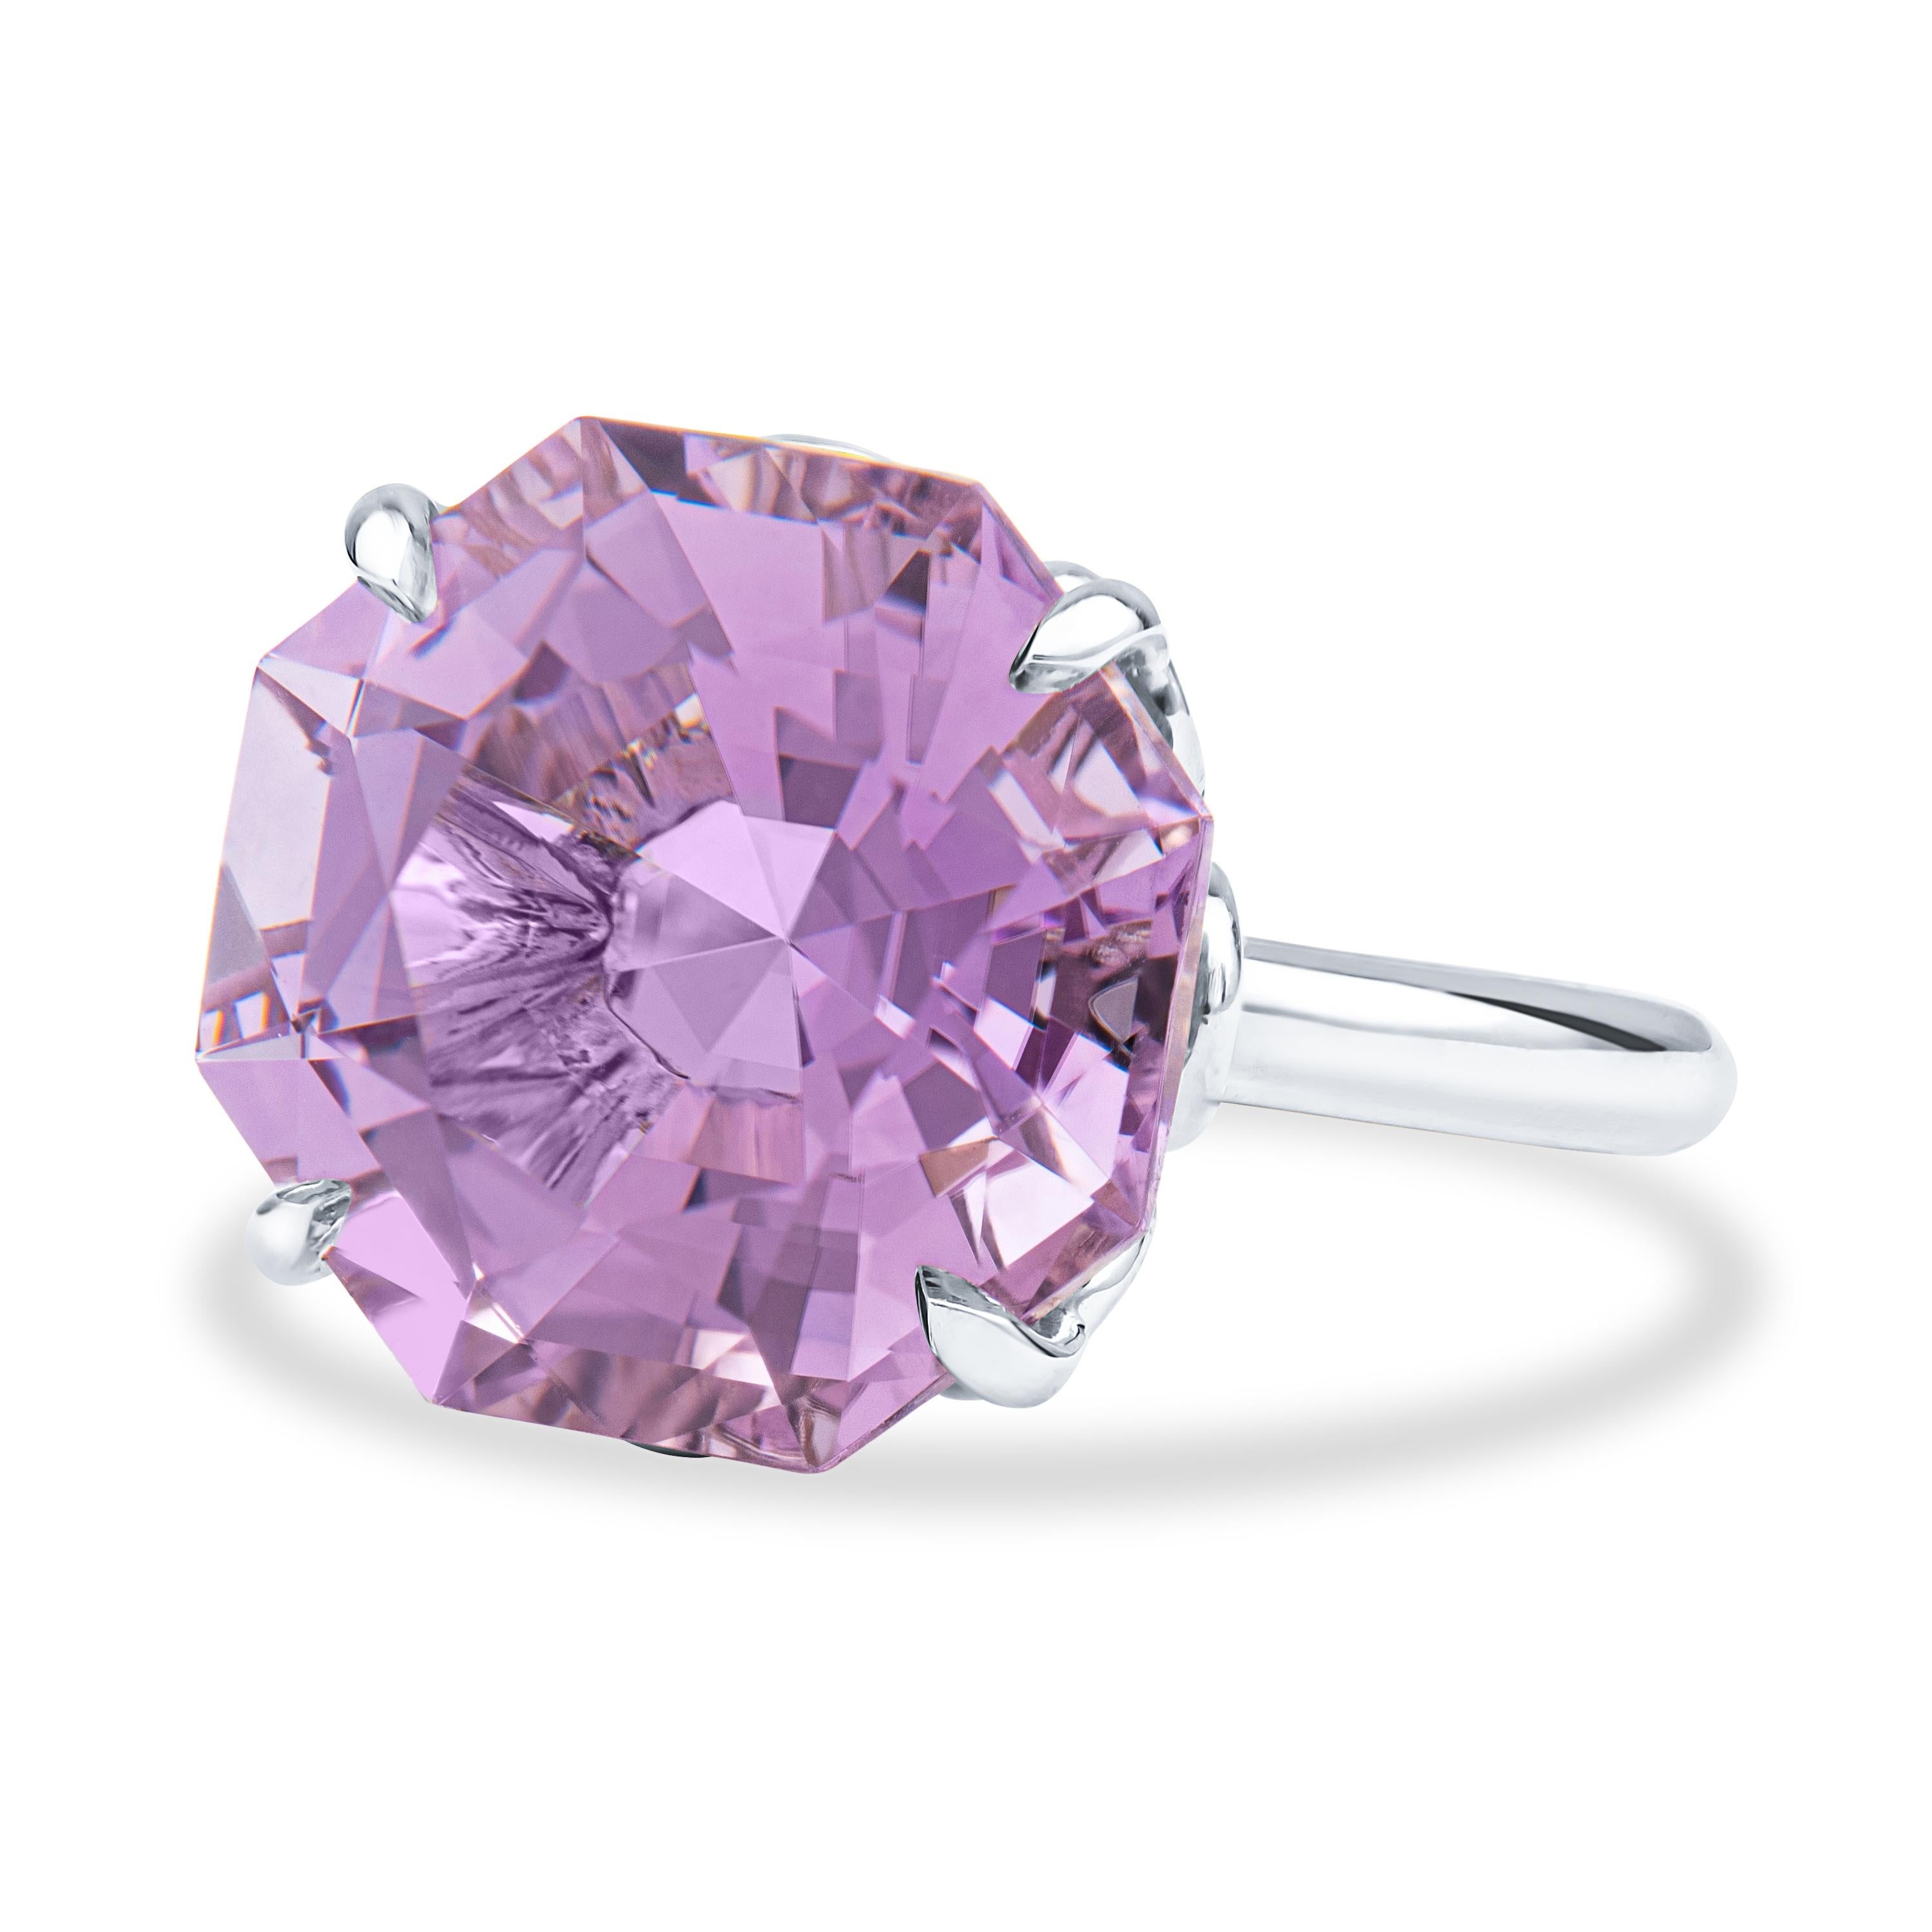 A beautiful cocktail ring from the Tiffany & Co. Sparklers collection. This ring features an octagon cut lavender amethyst measuring 13.16 mm x 13.16mm set in a sterling silver band. The ring is a size 5 and comes new with box and pouch.  The MSRP